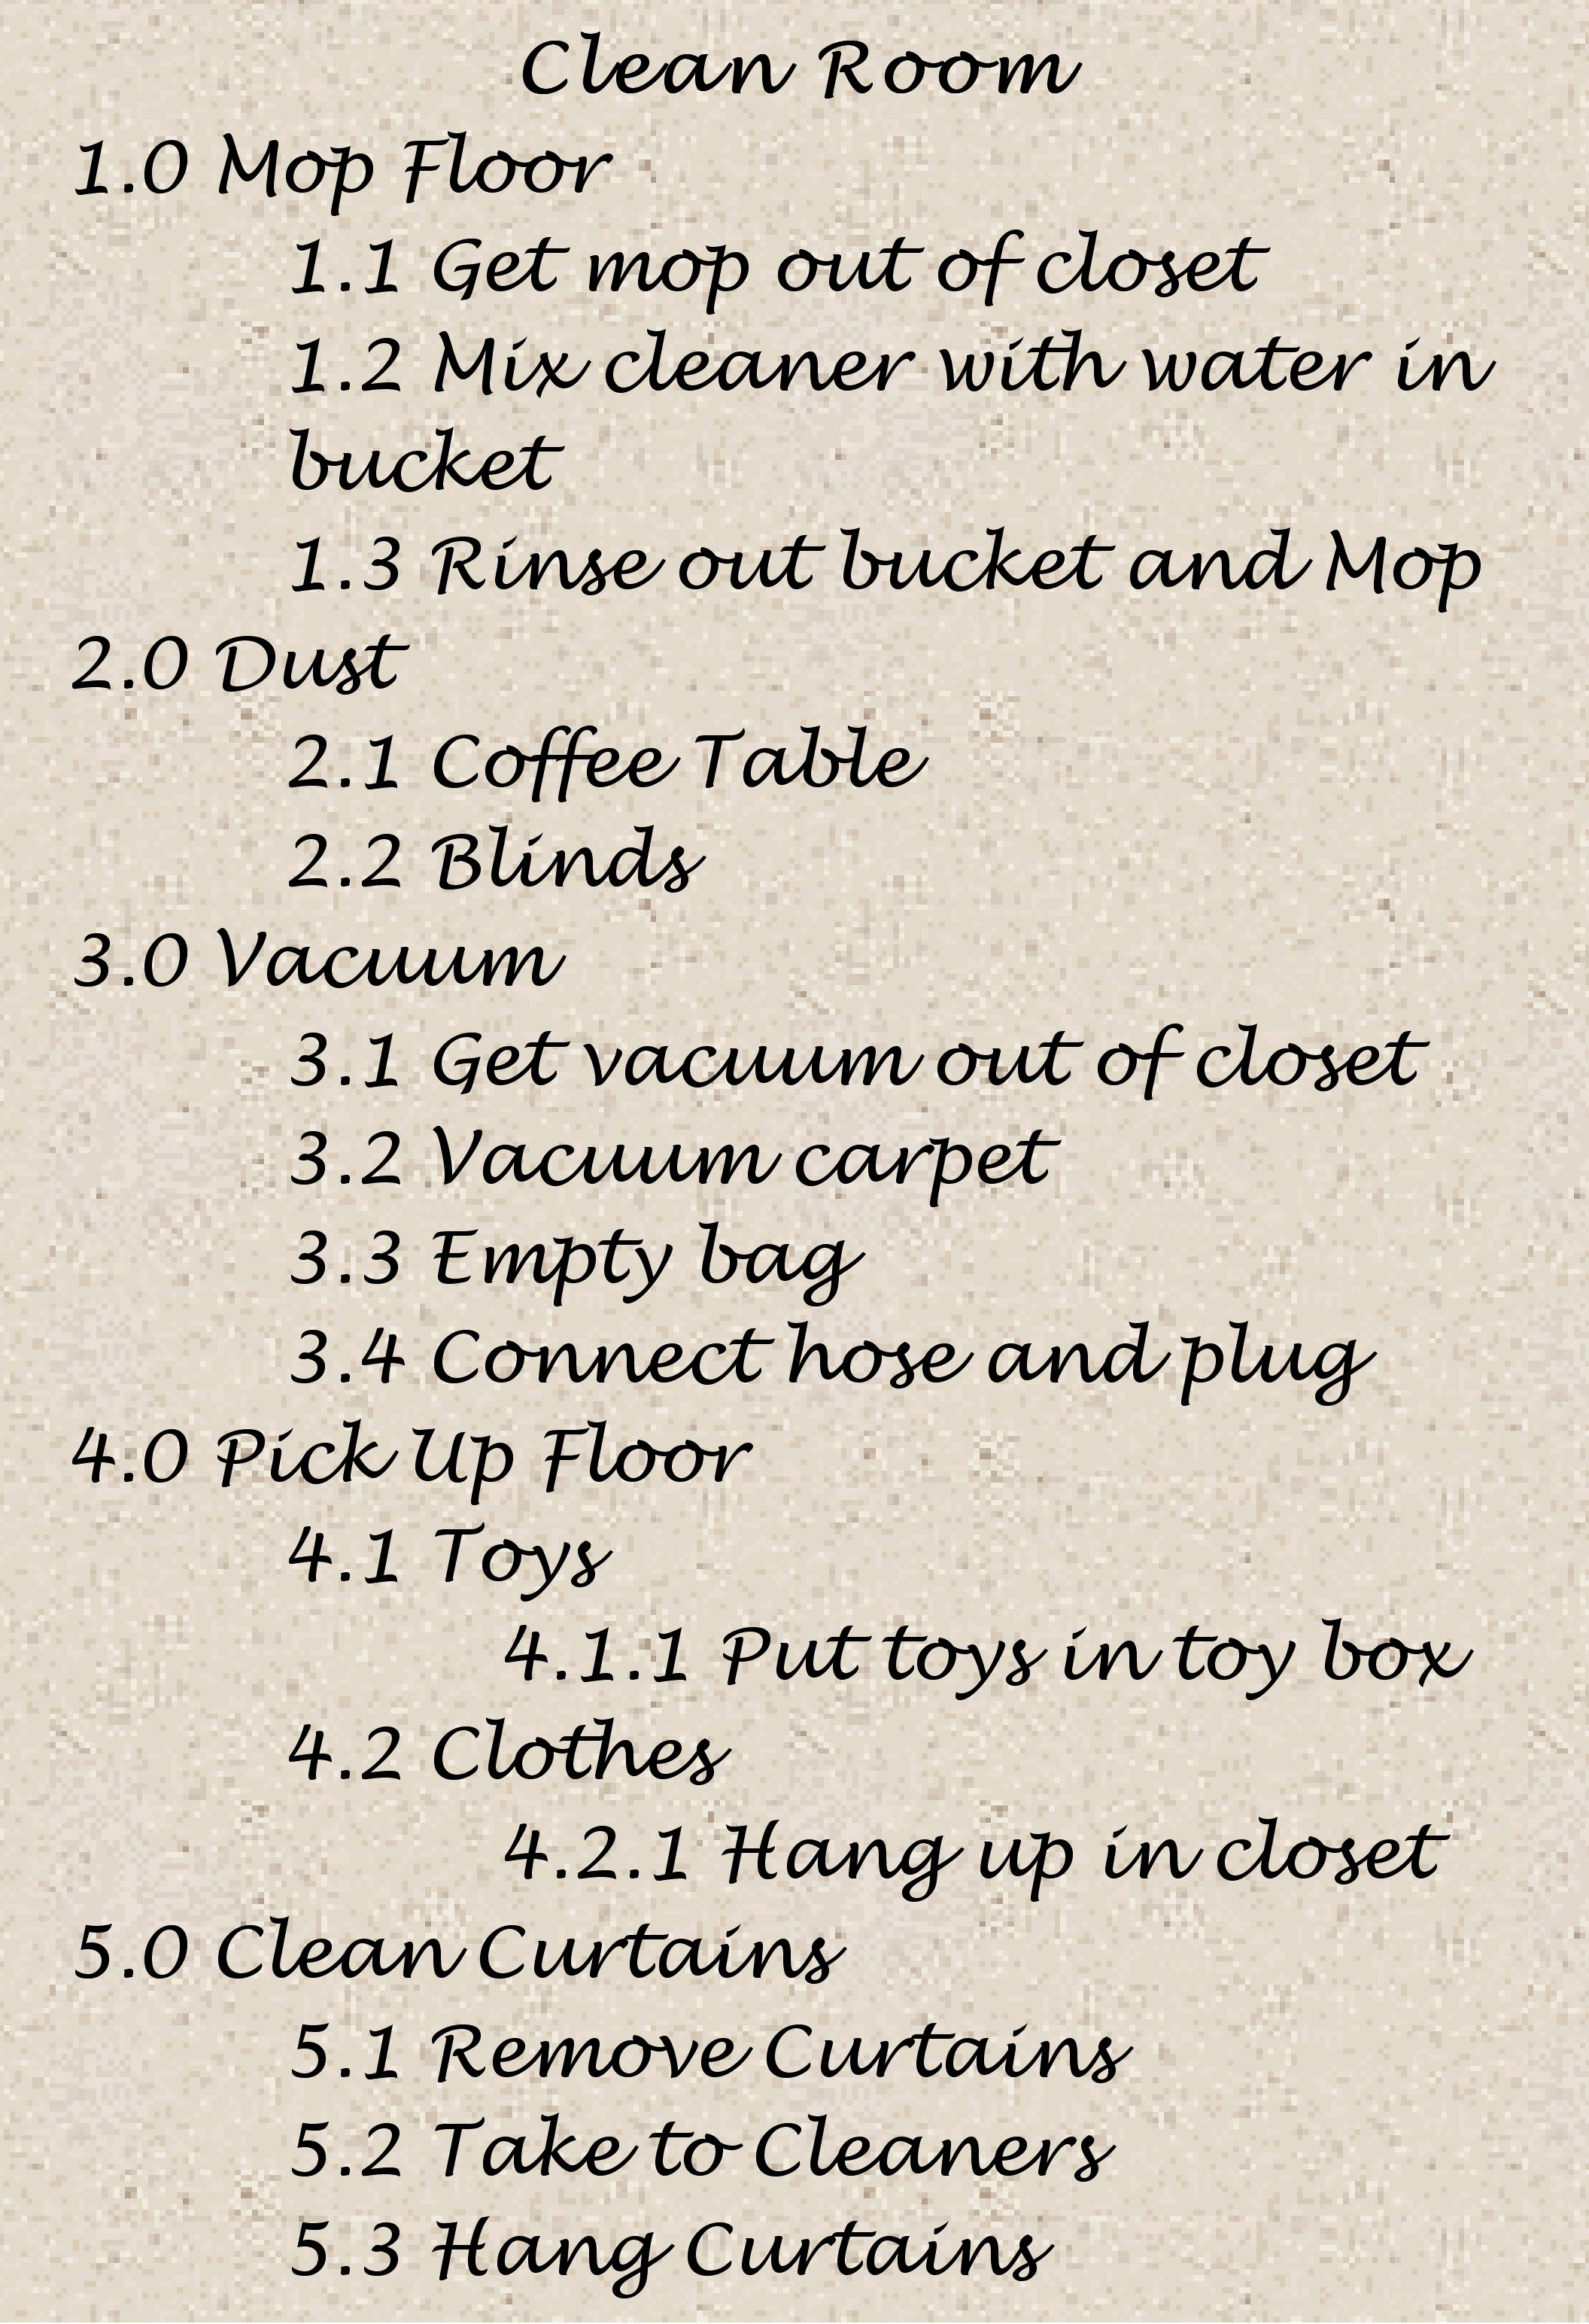 List showing the sequence of activities needed to clean a room.